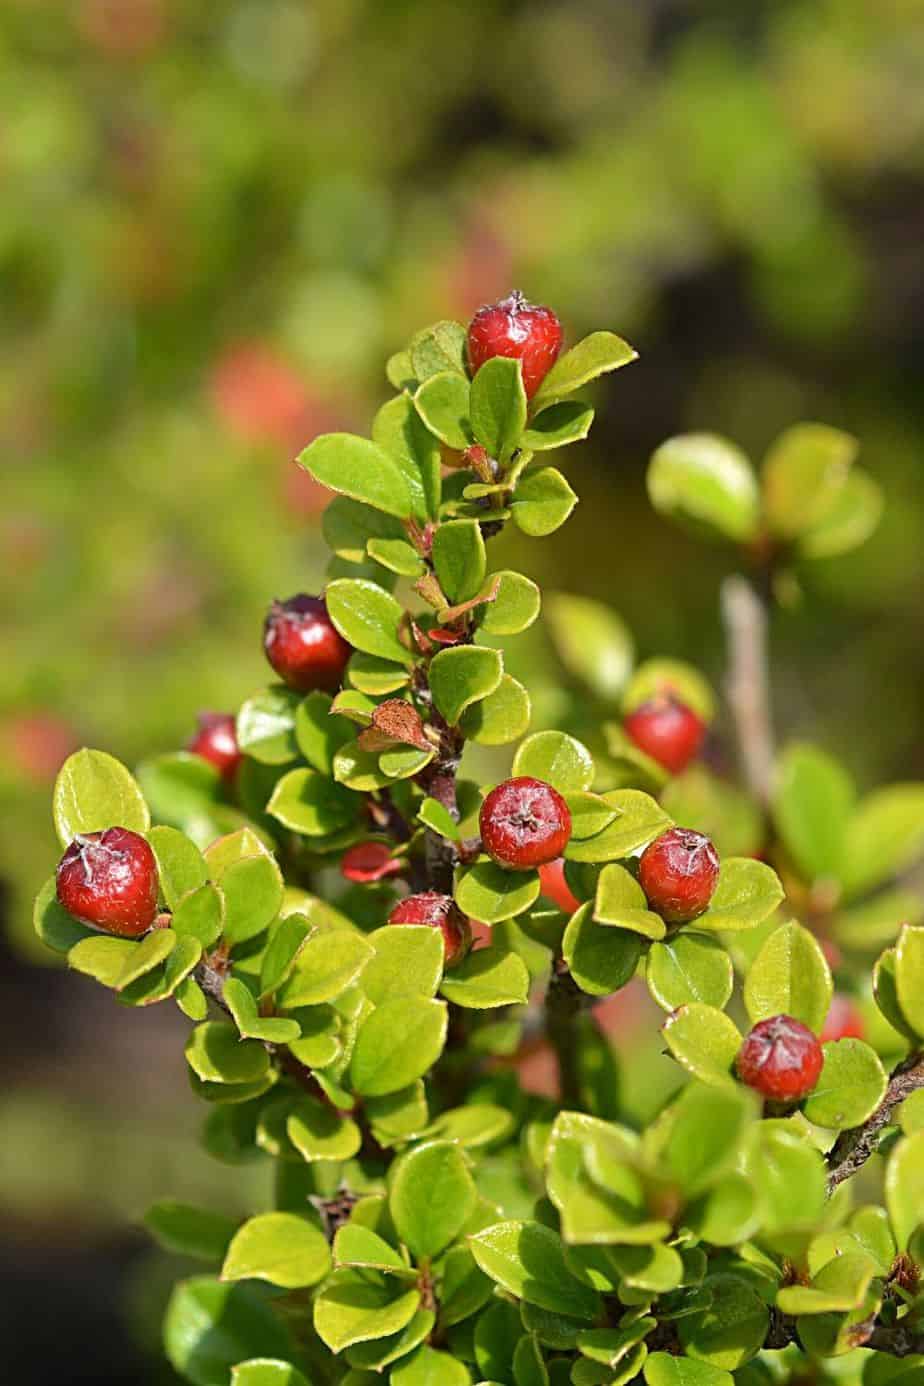 Rock Cotoneaster (Cotoneaster Horizontalis) is a very simple plant to grow on your southwest facing garden